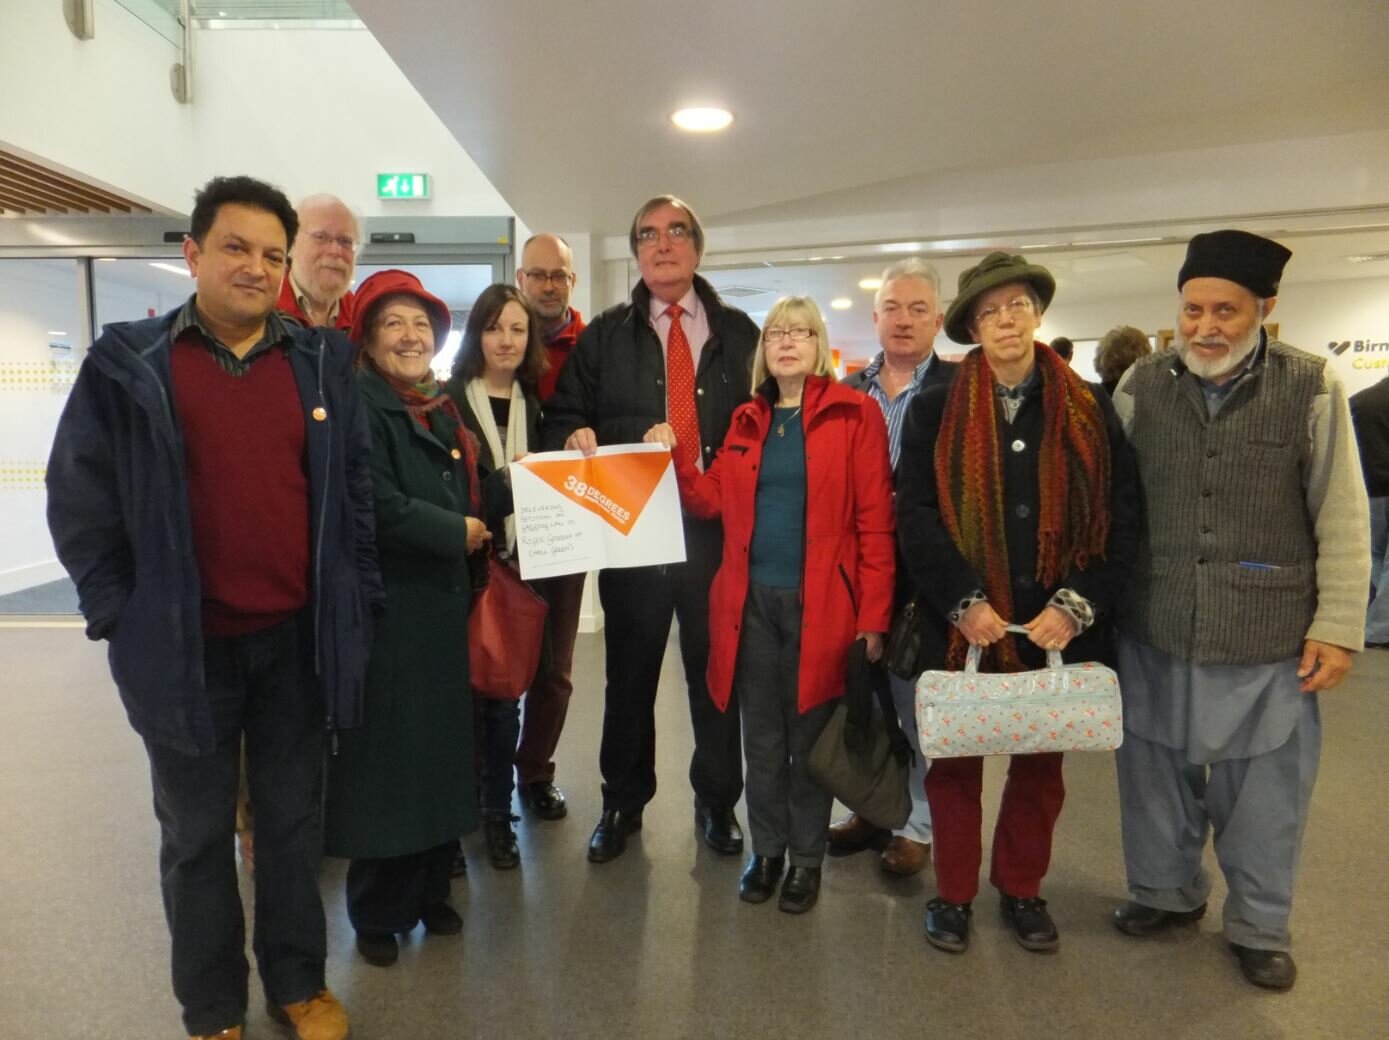 Supporters of the 38 Degrees campaign group presenting a petition to Roger opposing the Lobbying Bill. Birmingham, 3 January 2014.